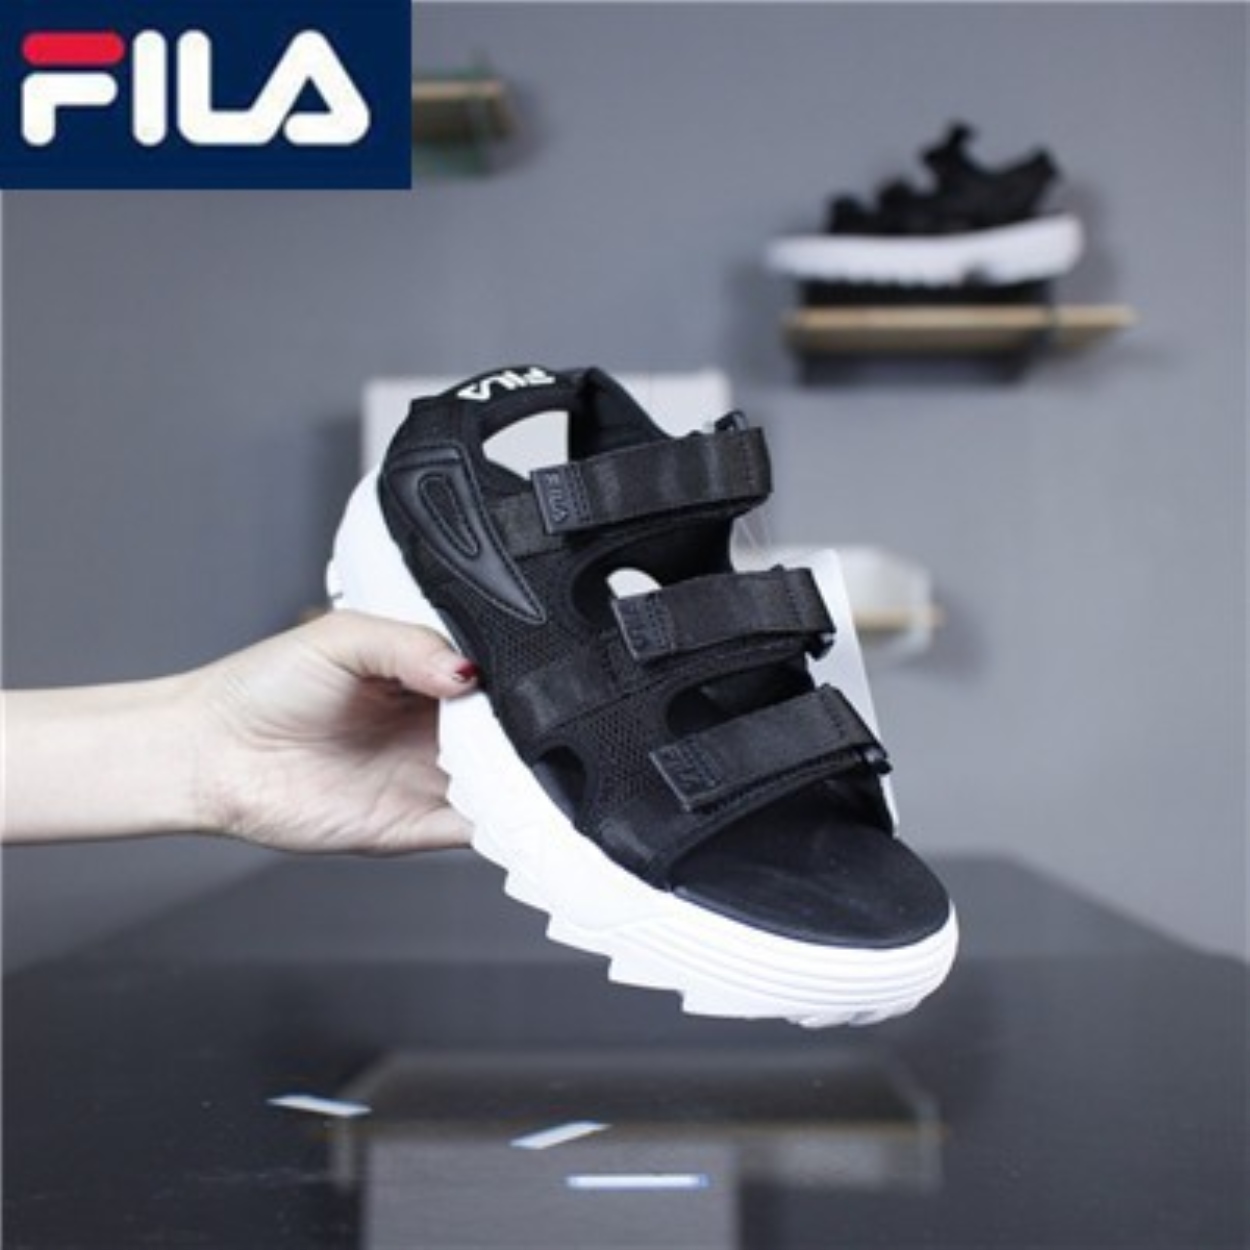 Details 153+ fila sandals with straps best - awesomeenglish.edu.vn